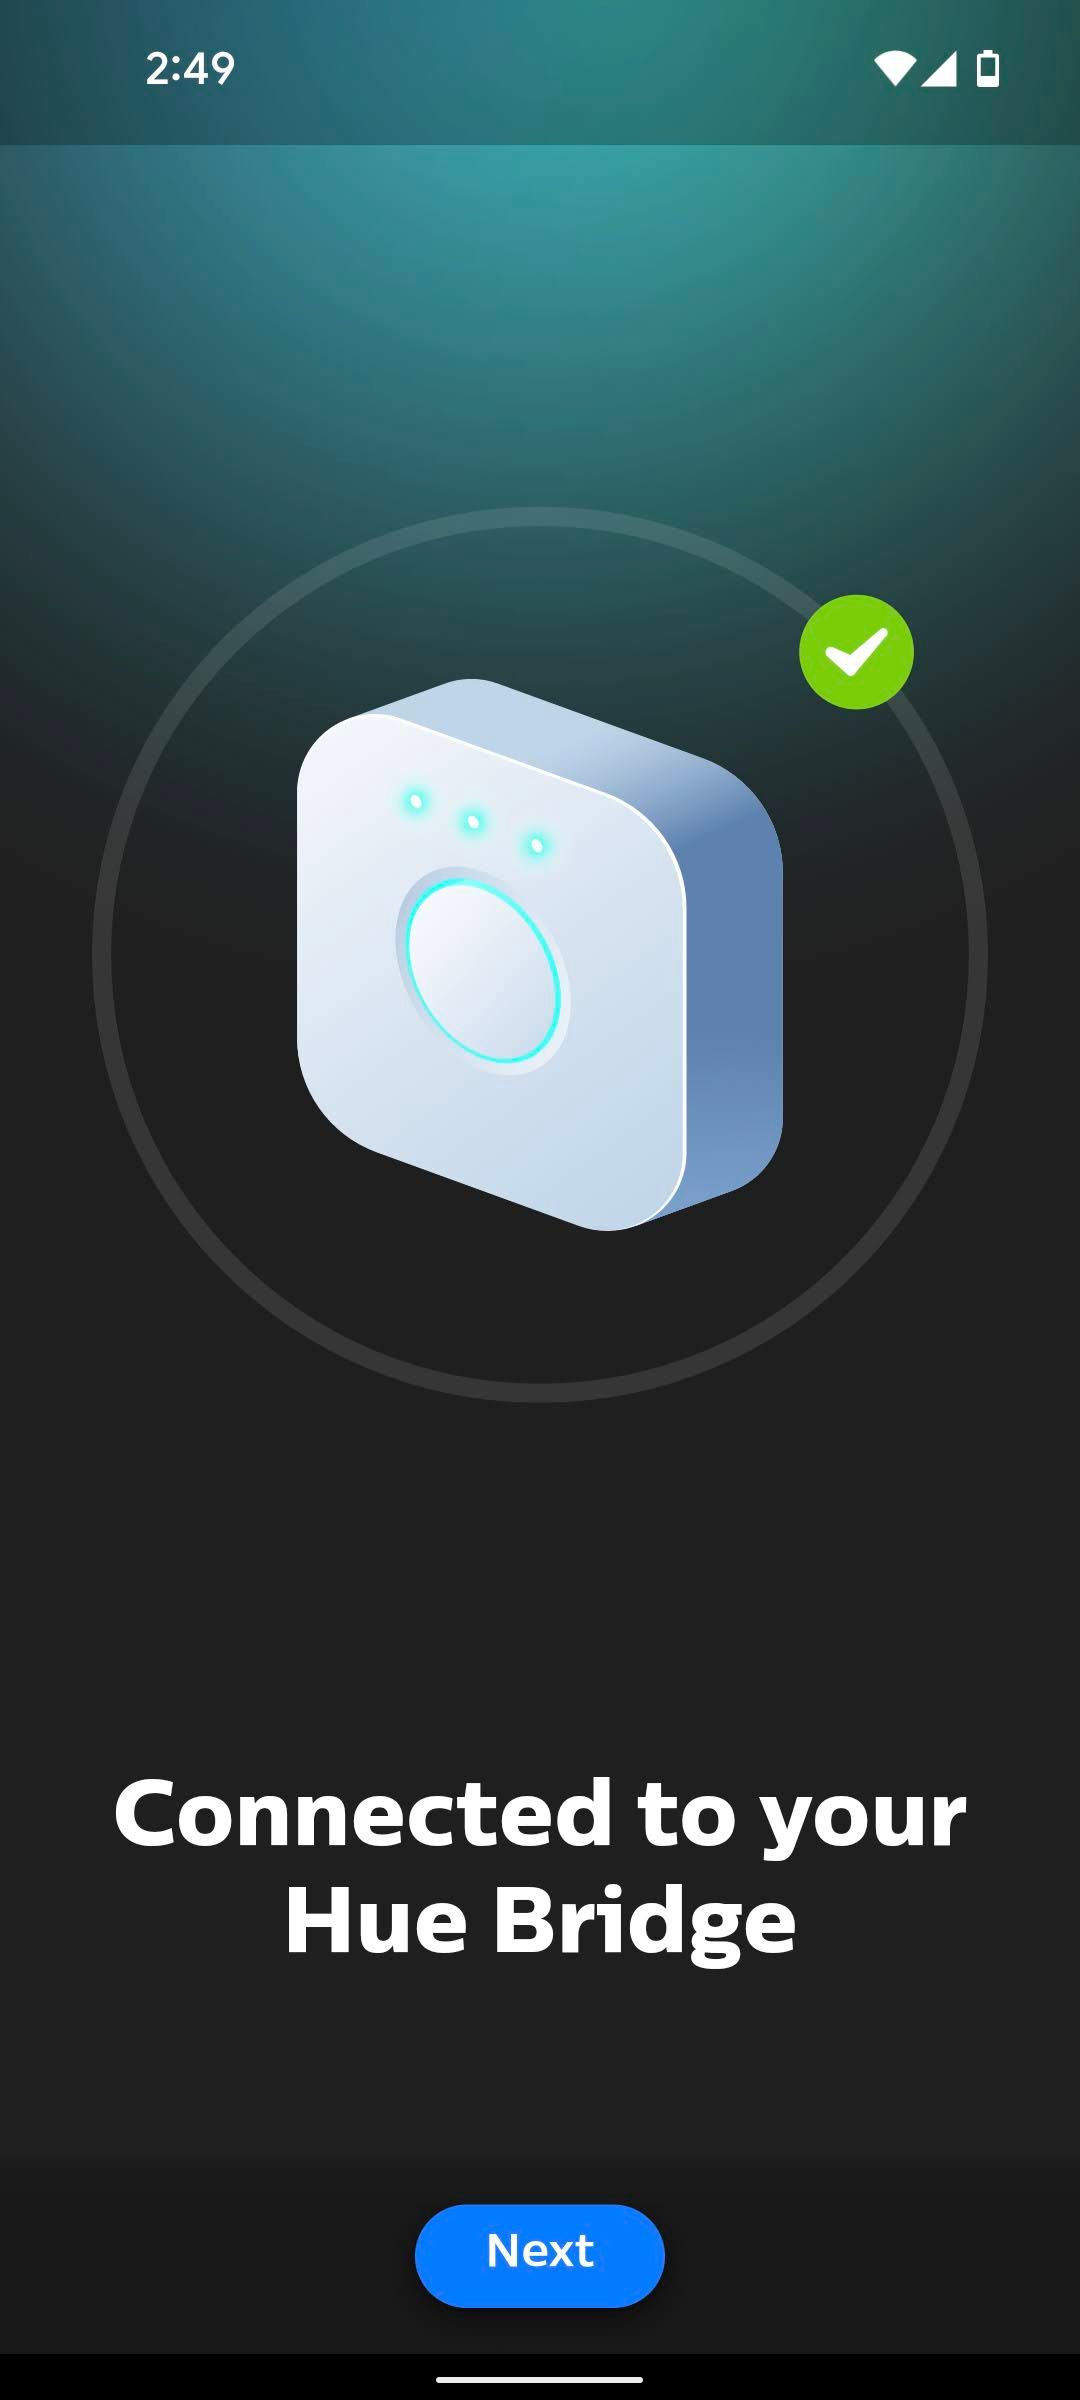 The Connected to Hue Bridge page in the Philips Hue Sync app